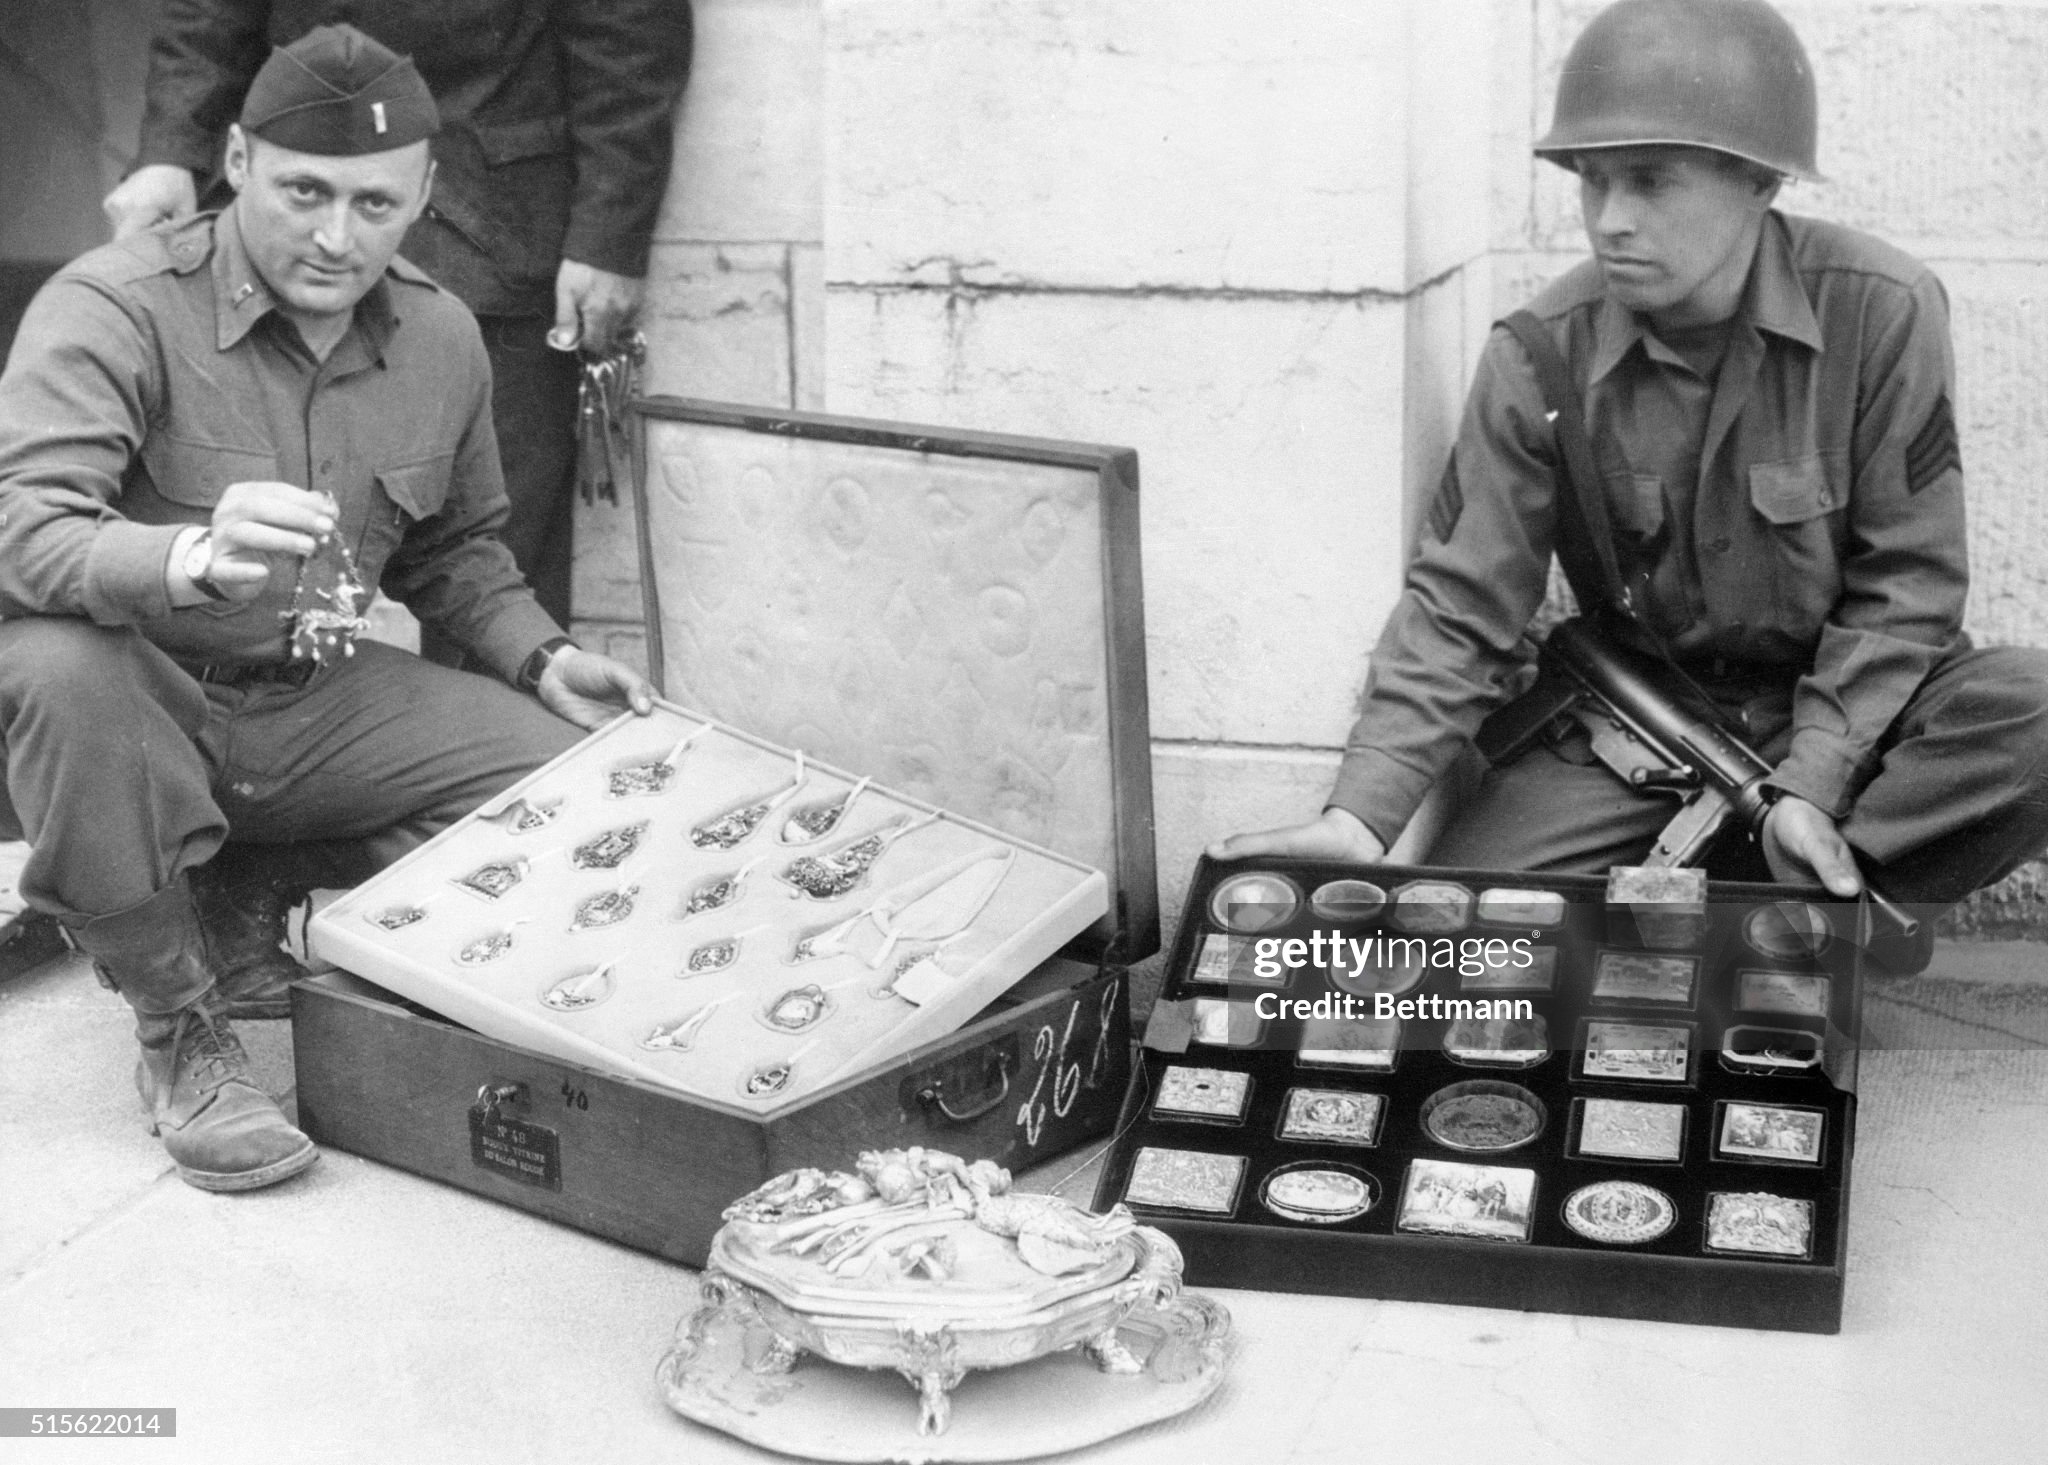 yanks-of-the-7th-army-unearth-looted-art-treasures-hidden-by-the-nazis-here-is-a-tray-of.jpg